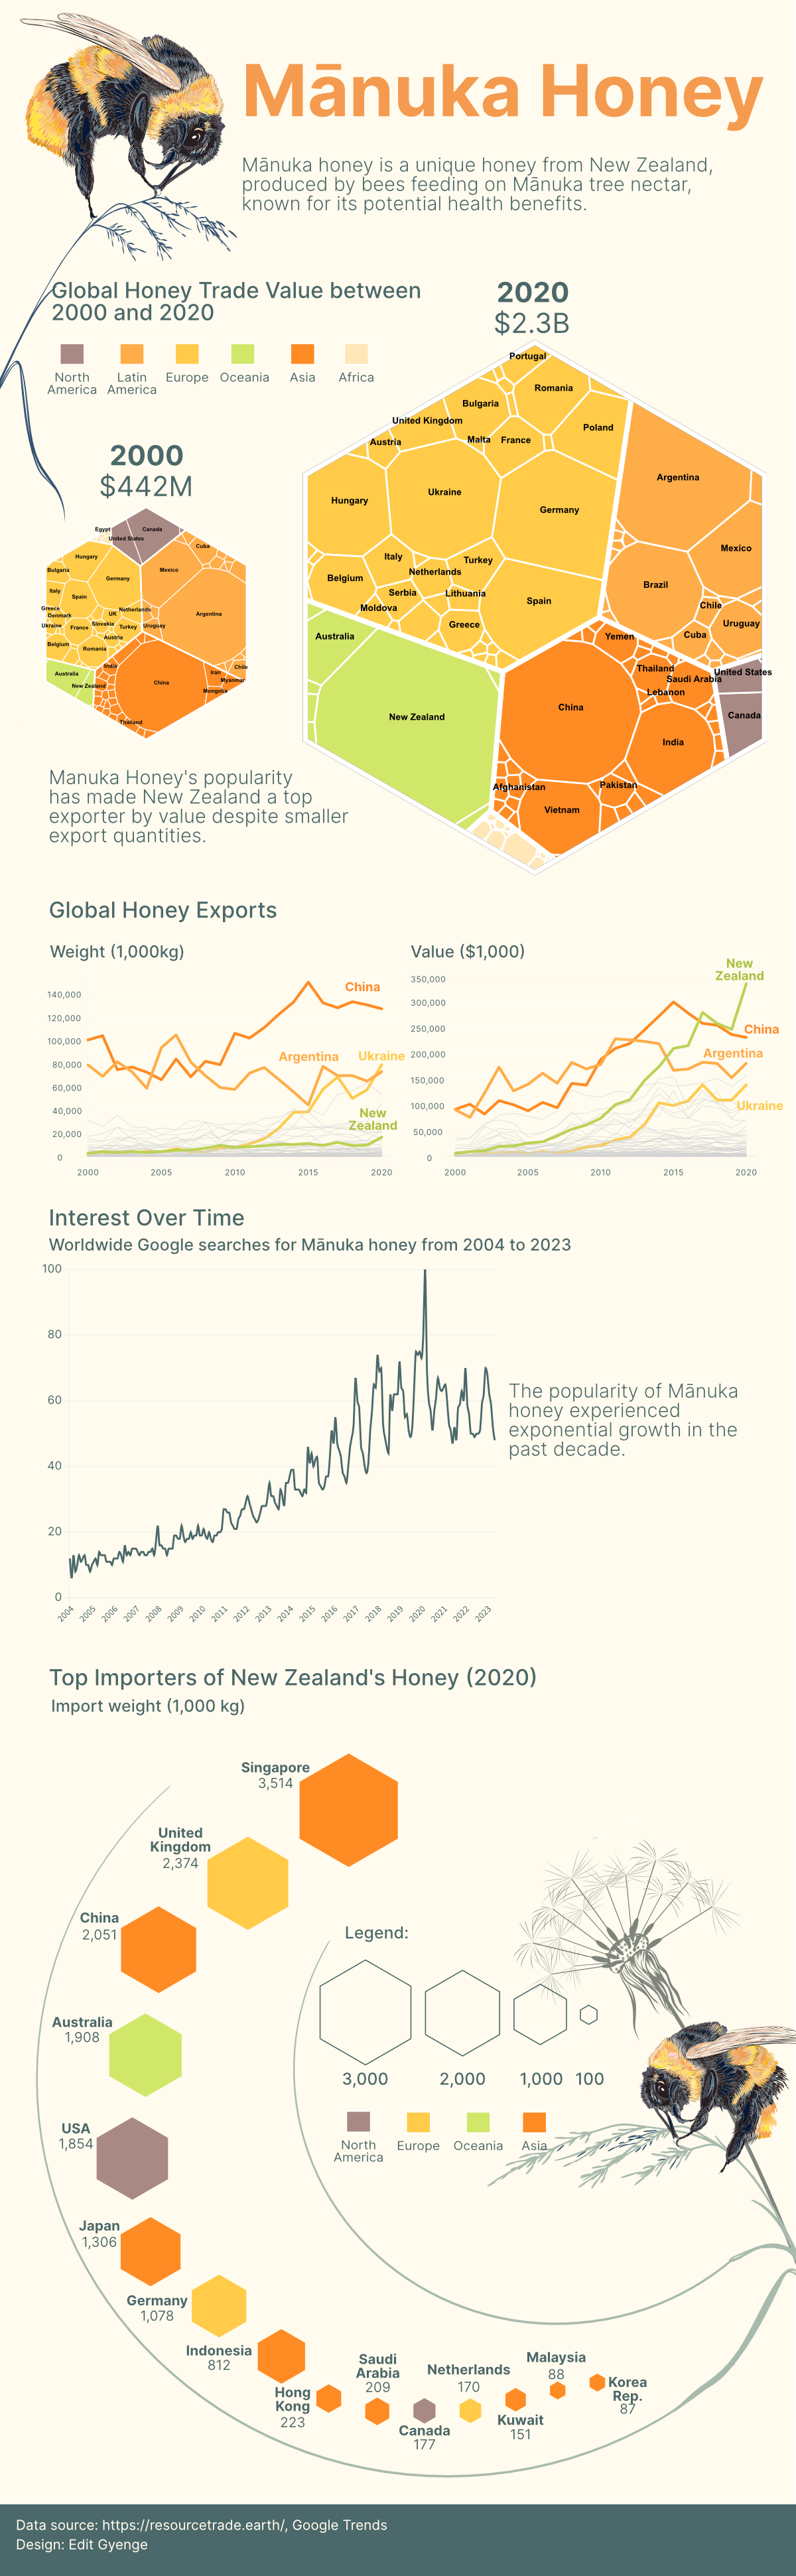 This infographic highlights Mānuka honey and global honey exports